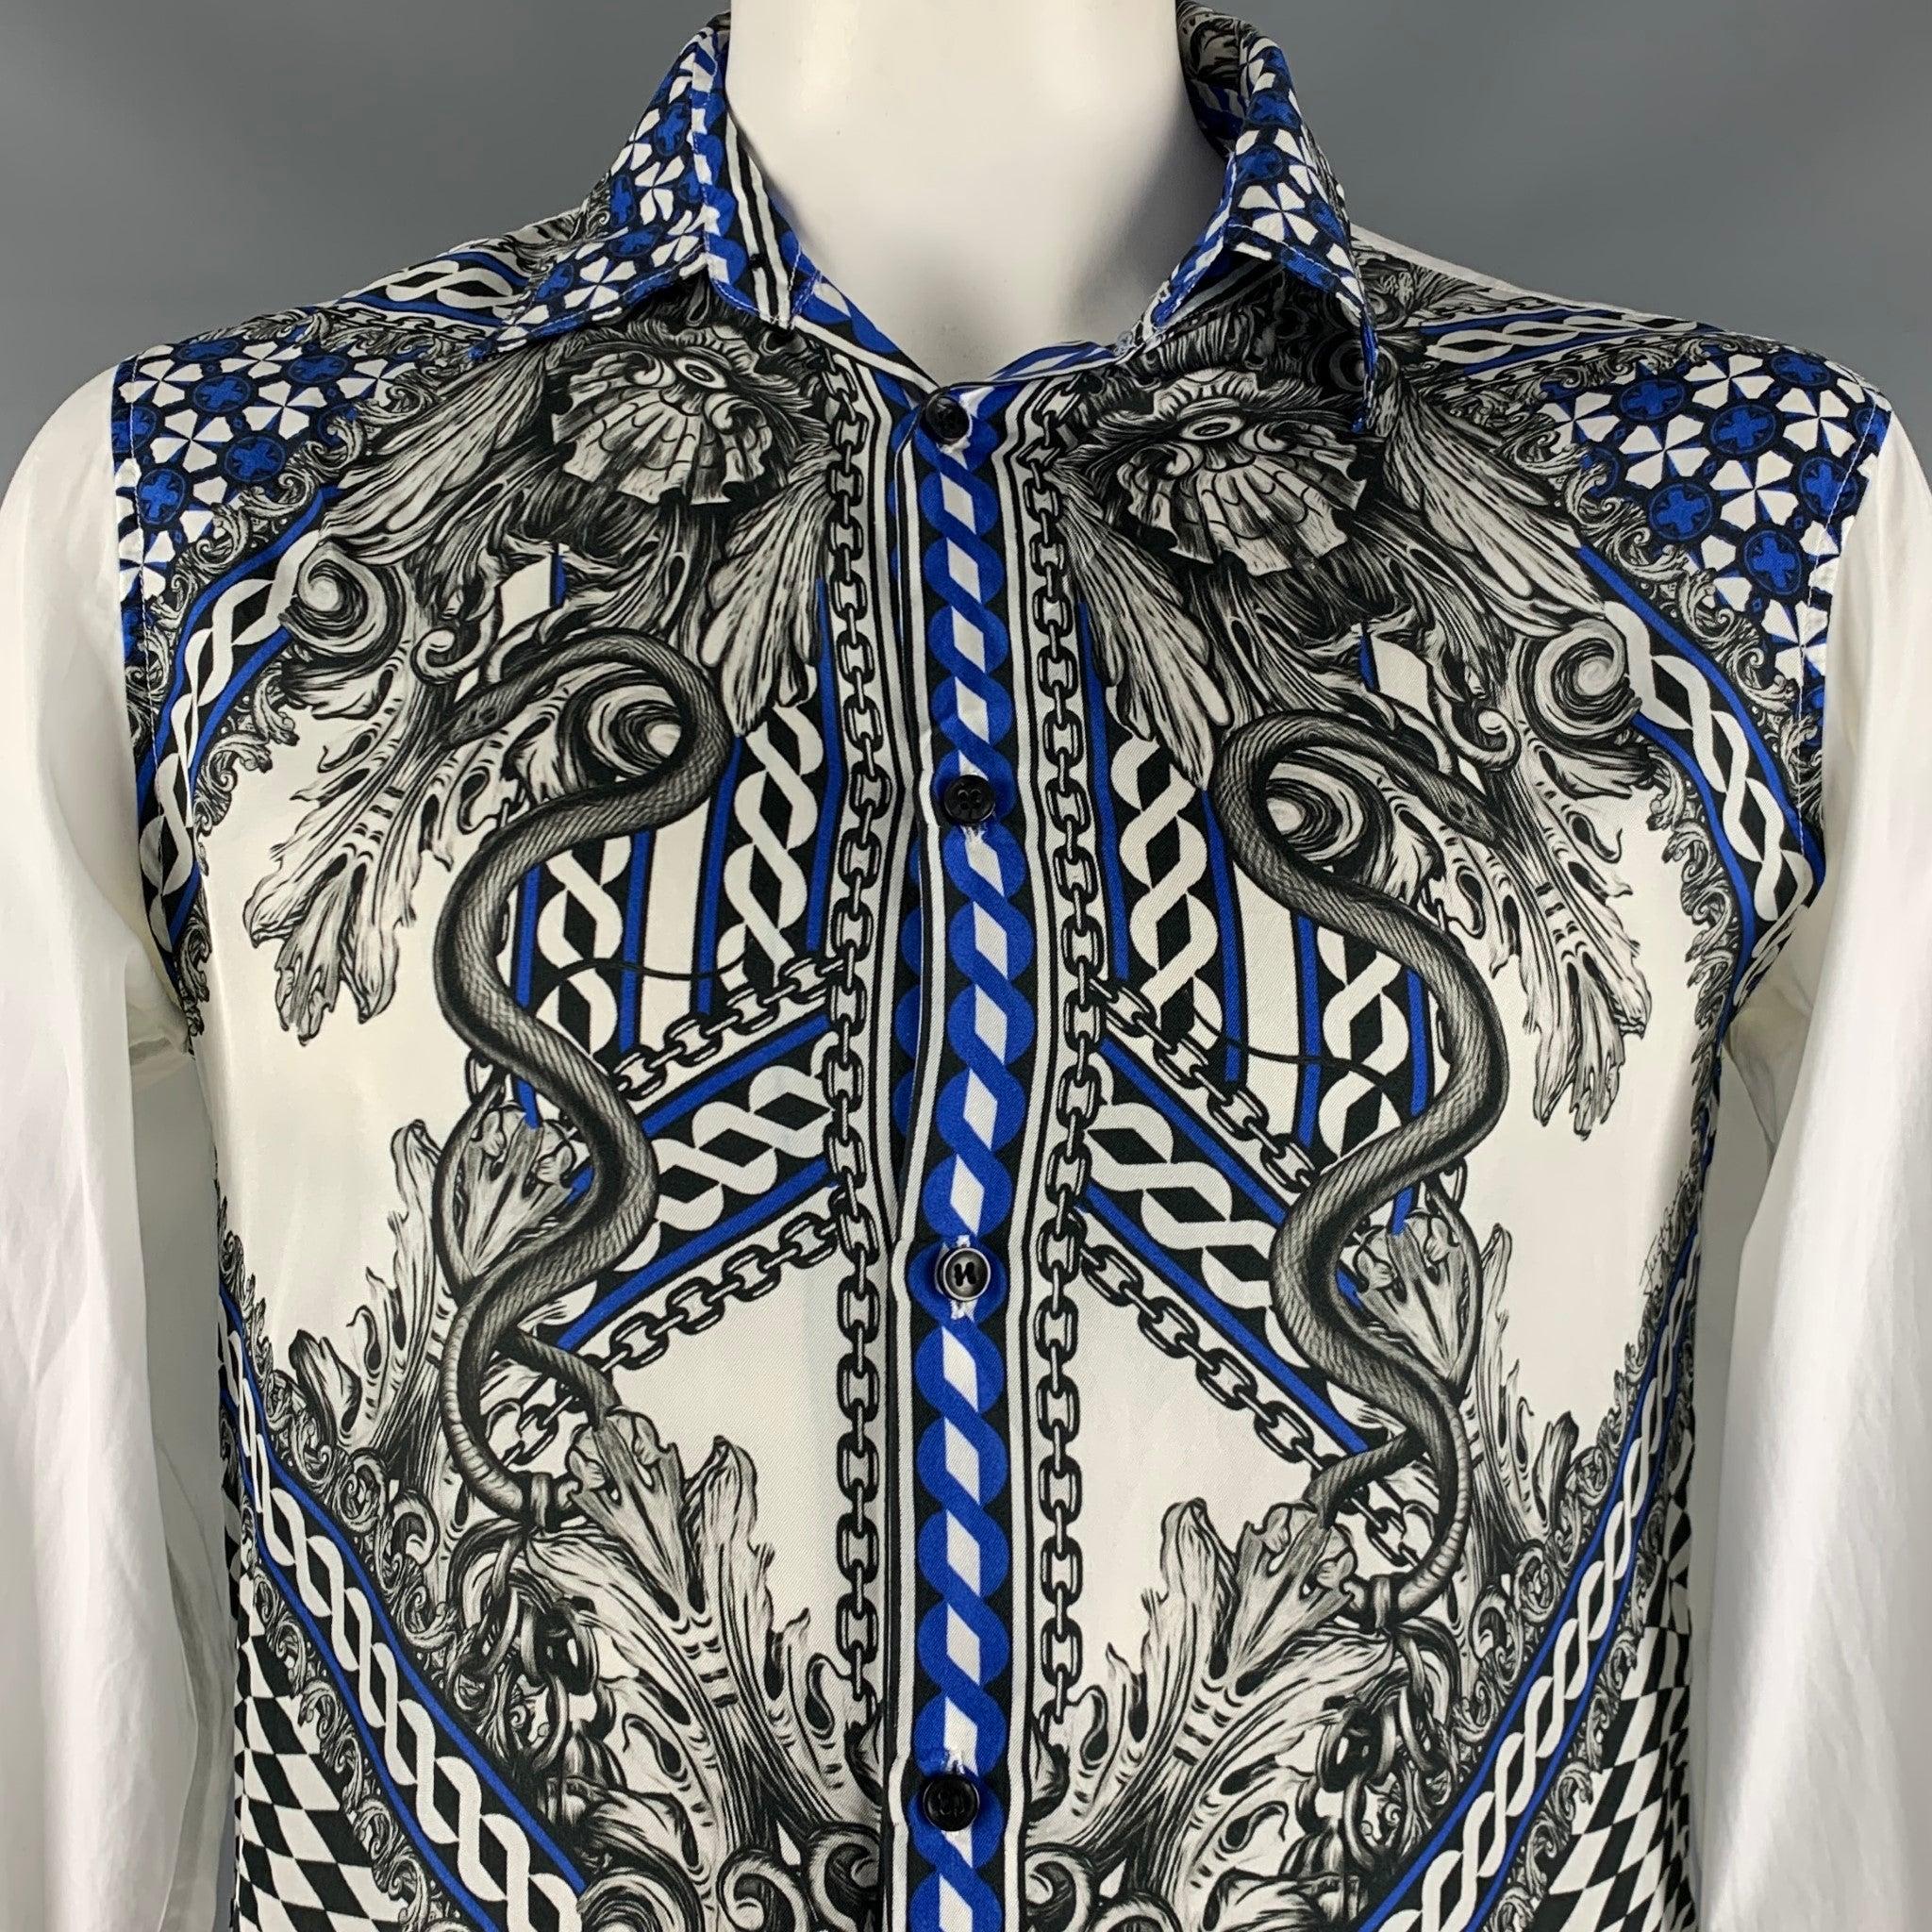 JUST CAVALLI long sleeve shirt in a white cotton fabric featuring a silk front with blue and black snake design, spread collar, and button closure.Very Good Pre-Owned Condition. Moderate signs of wear. 

Marked:   52 

Measurements: 
 
Shoulder: